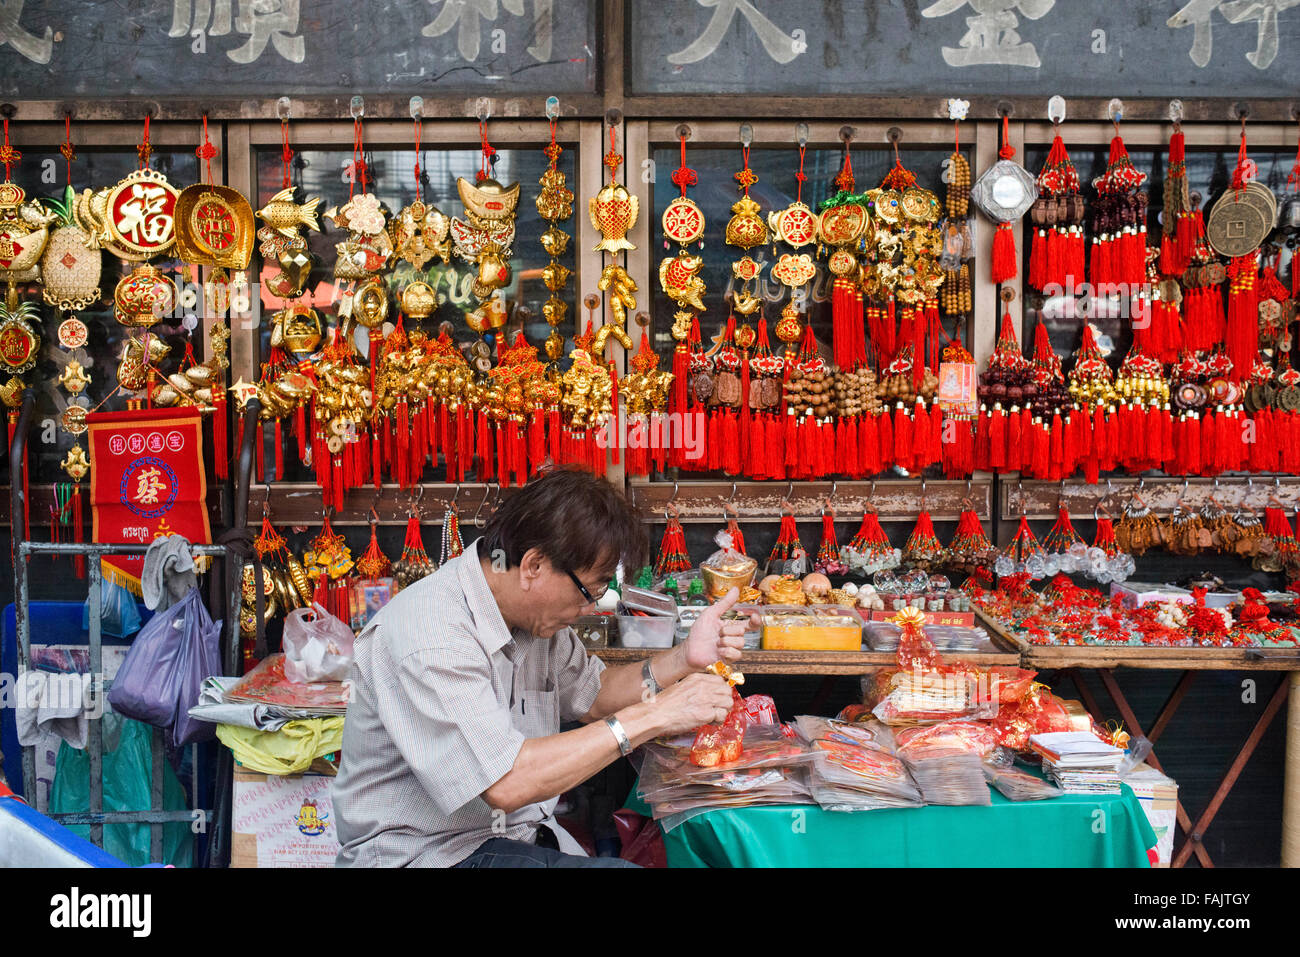 Amulets stall in the street in Chinatown Bangkok, Thailand. Yaowarat, Bangkok’s Chinatown, is the World’s most renowned street food destination and the local favorite dining district. Stock Photo